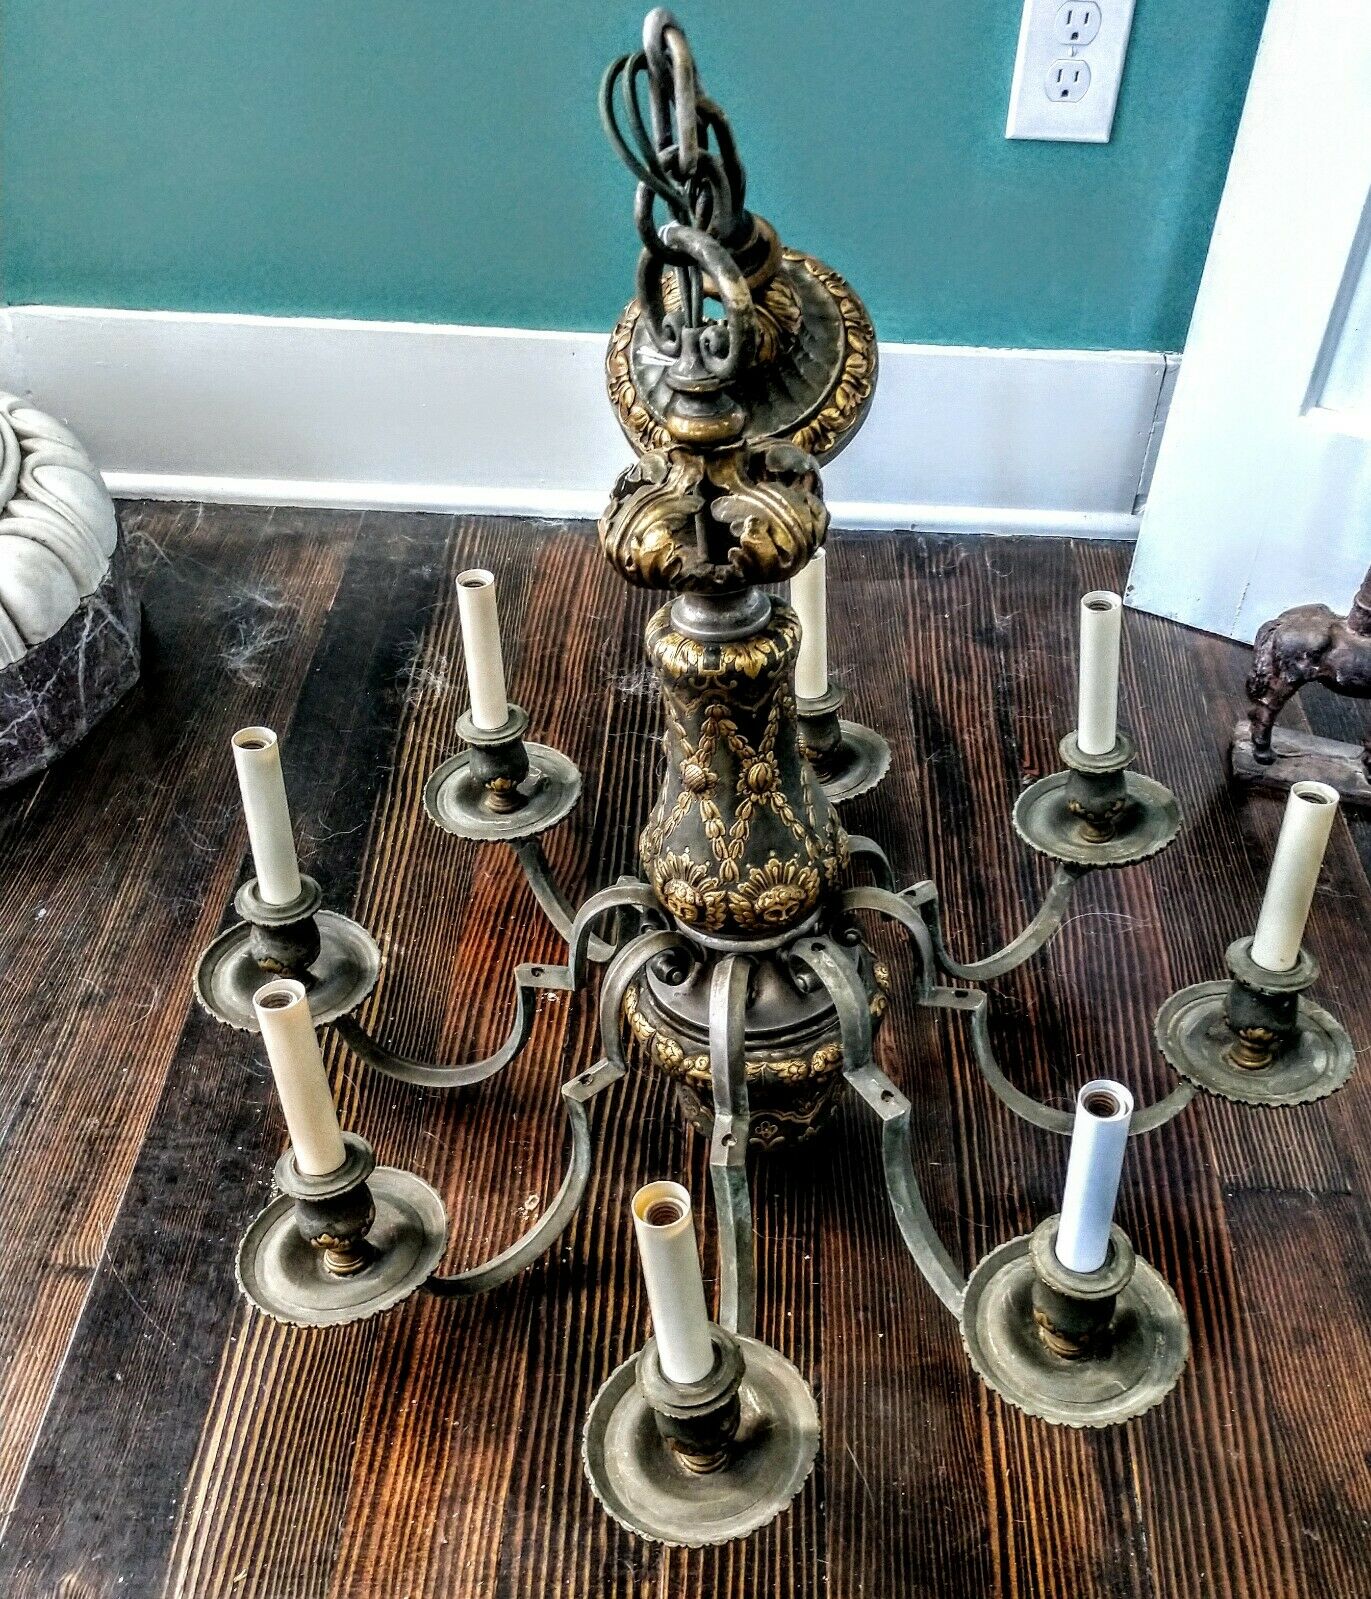 ⭐ Magnificent 8-arm Caldwell Renaissance Revival Chandelier!! Offers Welcome